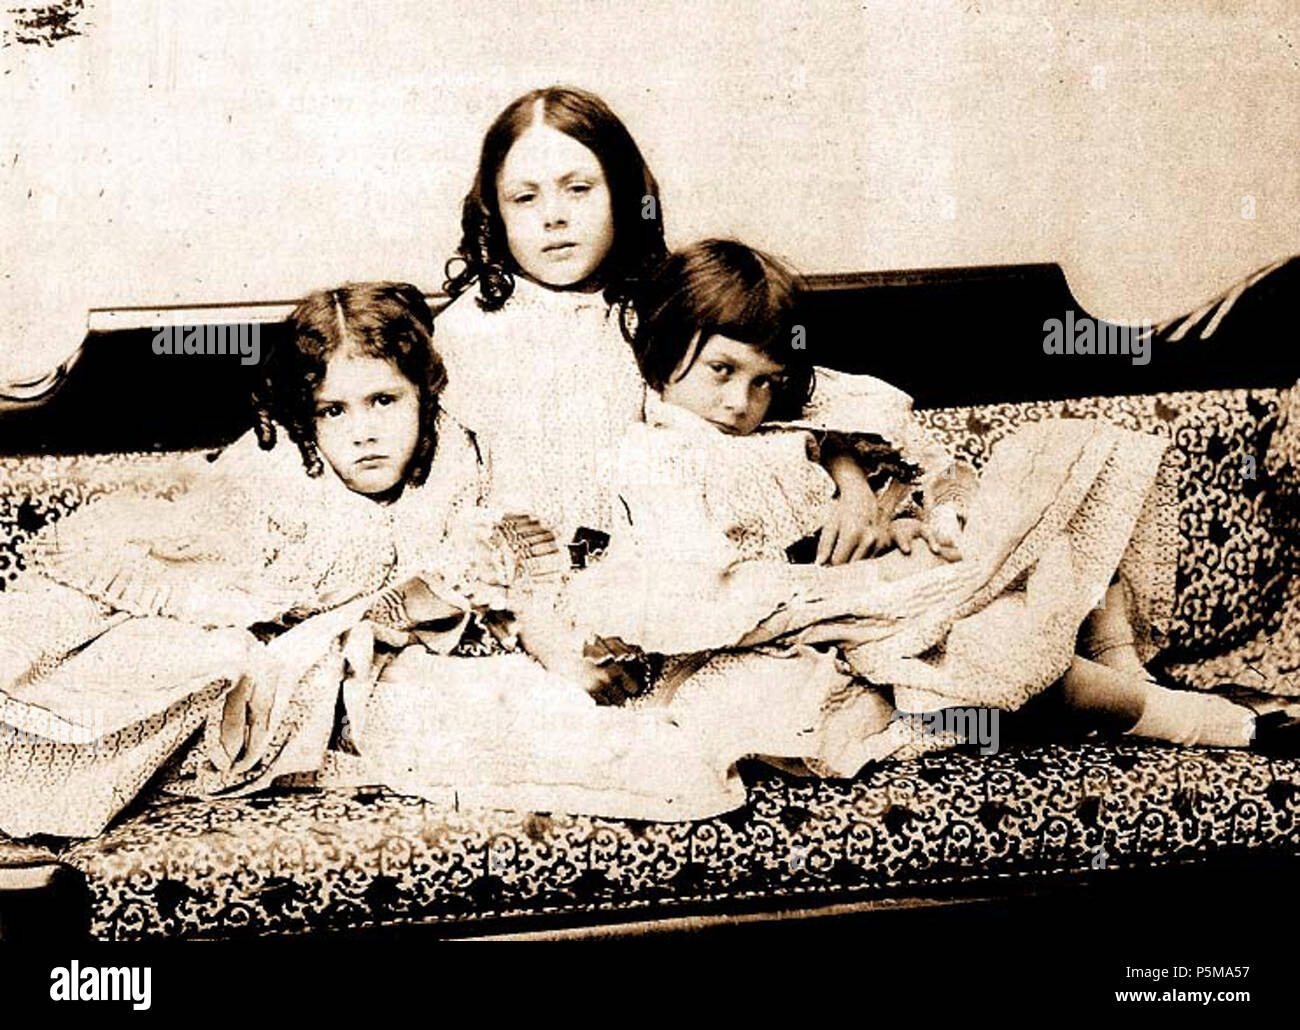 N/A. English: Edith, Lorina & Alice Liddell: This was first published in Carroll's biography by his nephew: Collingwood, Stuart Dodgson (1898) The Life and Letters of Lewis Carroll, London: T. Fisher Unwin, pp. p. 94 Retrieved on 22 December 2010. . 1859.   Lewis Carroll  (1832–1898)       Alternative names Charles Lutwidge Dodgson  Description British-English writer, mathematician and photographer  Date of birth/death 27 January 1832 14 January 1898  Location of birth/death Daresbury, Cheshire, England Guildford, Surrey, England  Work period 1854 to 1898  Work location England  Authority cont Stock Photo